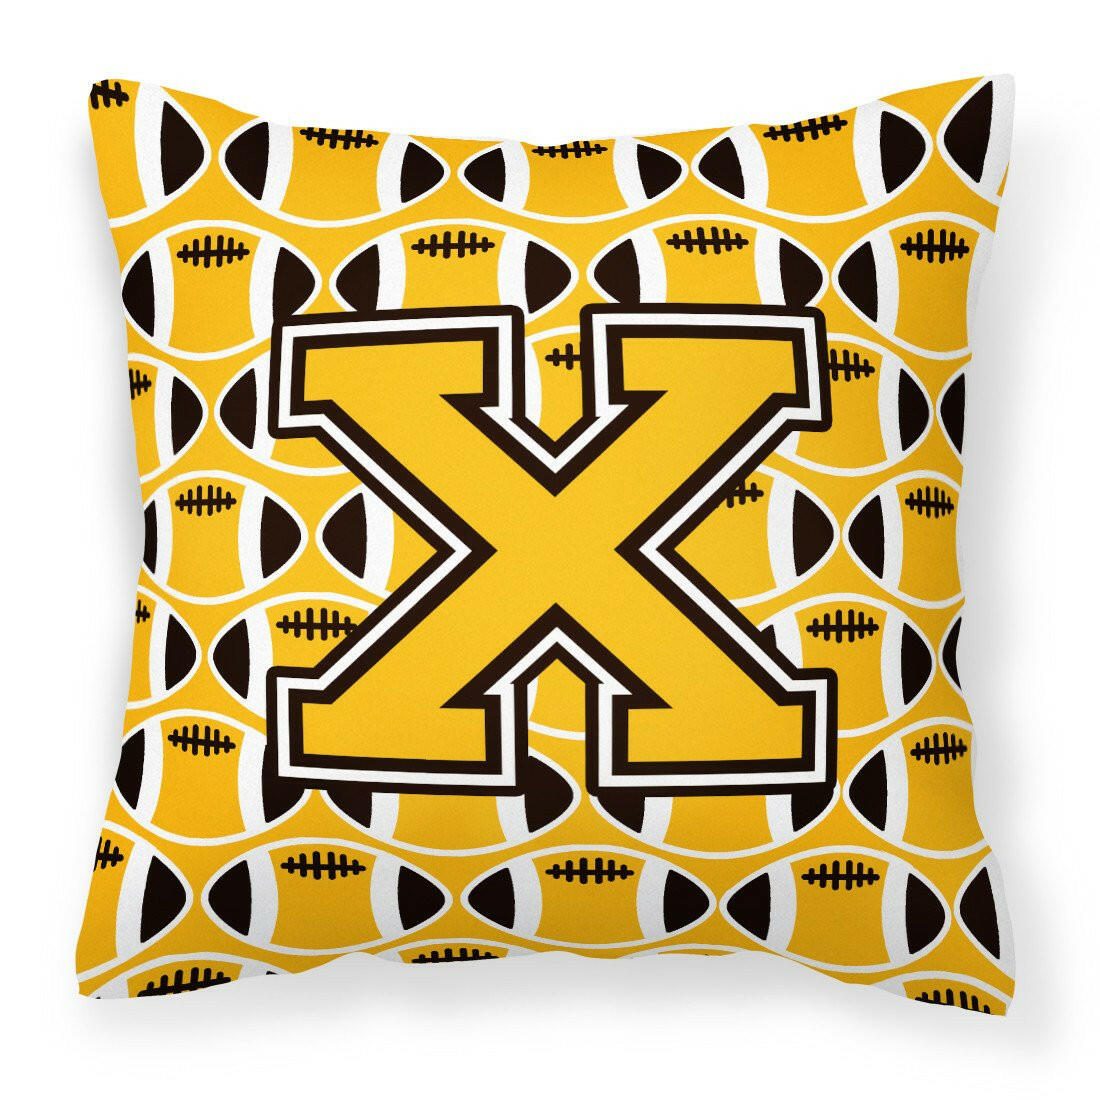 Letter X Football Black, Old Gold and White Fabric Decorative Pillow CJ1080-XPW1414 by Caroline's Treasures